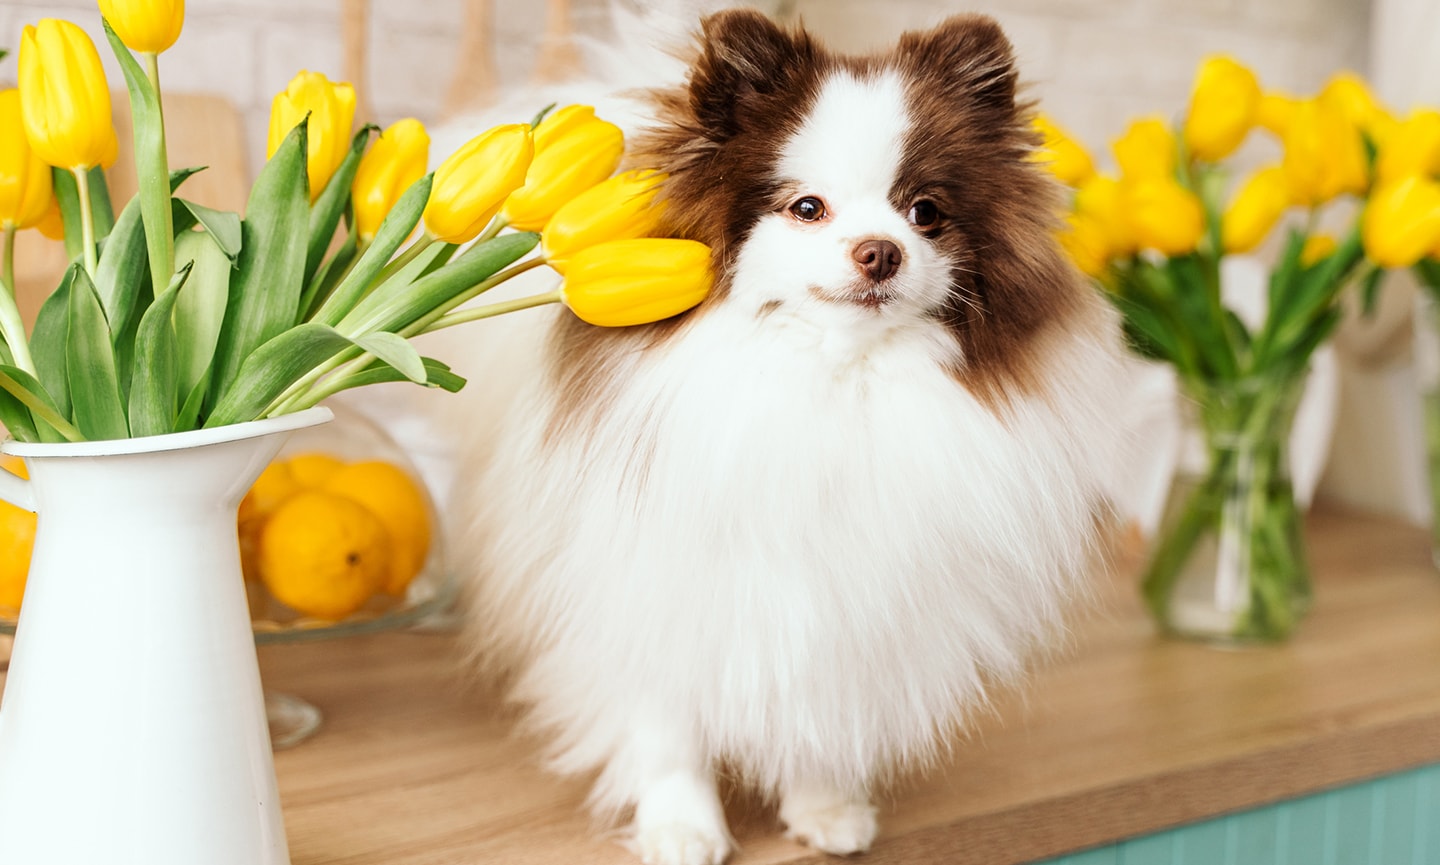 https://media-be.chewy.com/wp-content/uploads/2022/11/16190343/dog-with-tulips.jpg